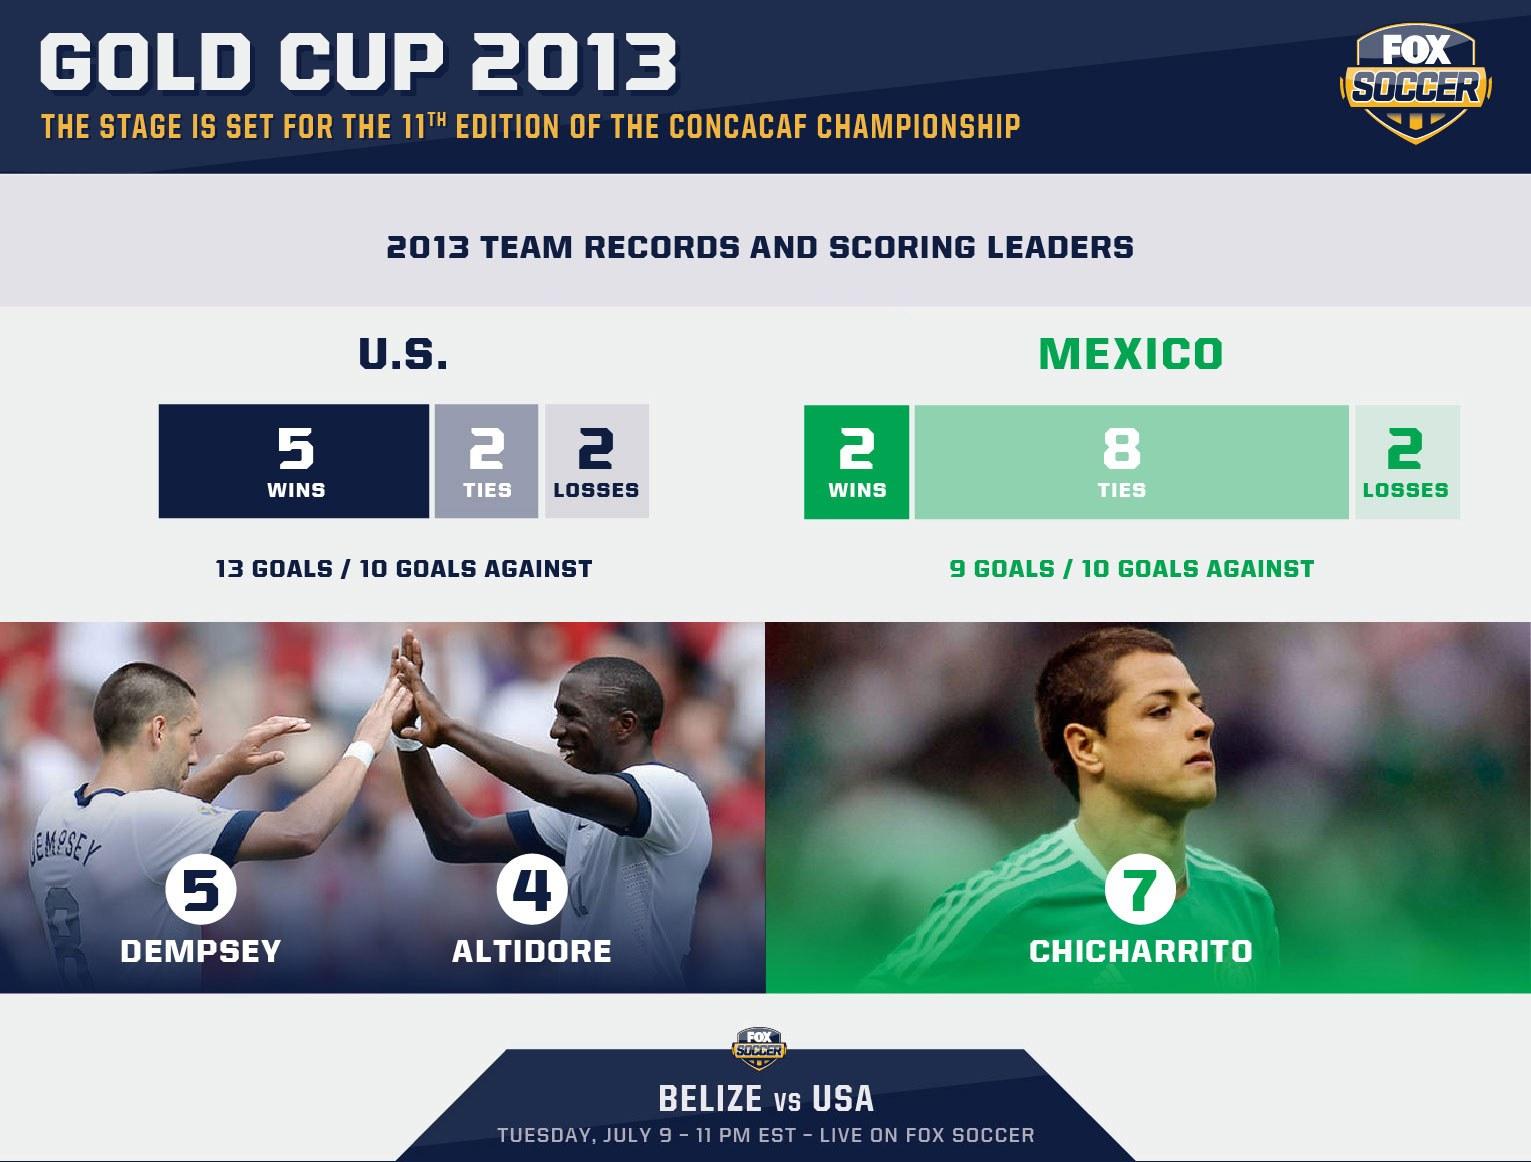 Promotional graphic for the 2013 Gold Cup featuring the US and Mexican national soccer teams. The U.S. team has 5 wins, 2 ties, 2 losses with players Dempsey and Altidore. Mexico has 2 wins, 8 ties, 2 losses with player Chicharito. Match scheduled with Belize vs USA.